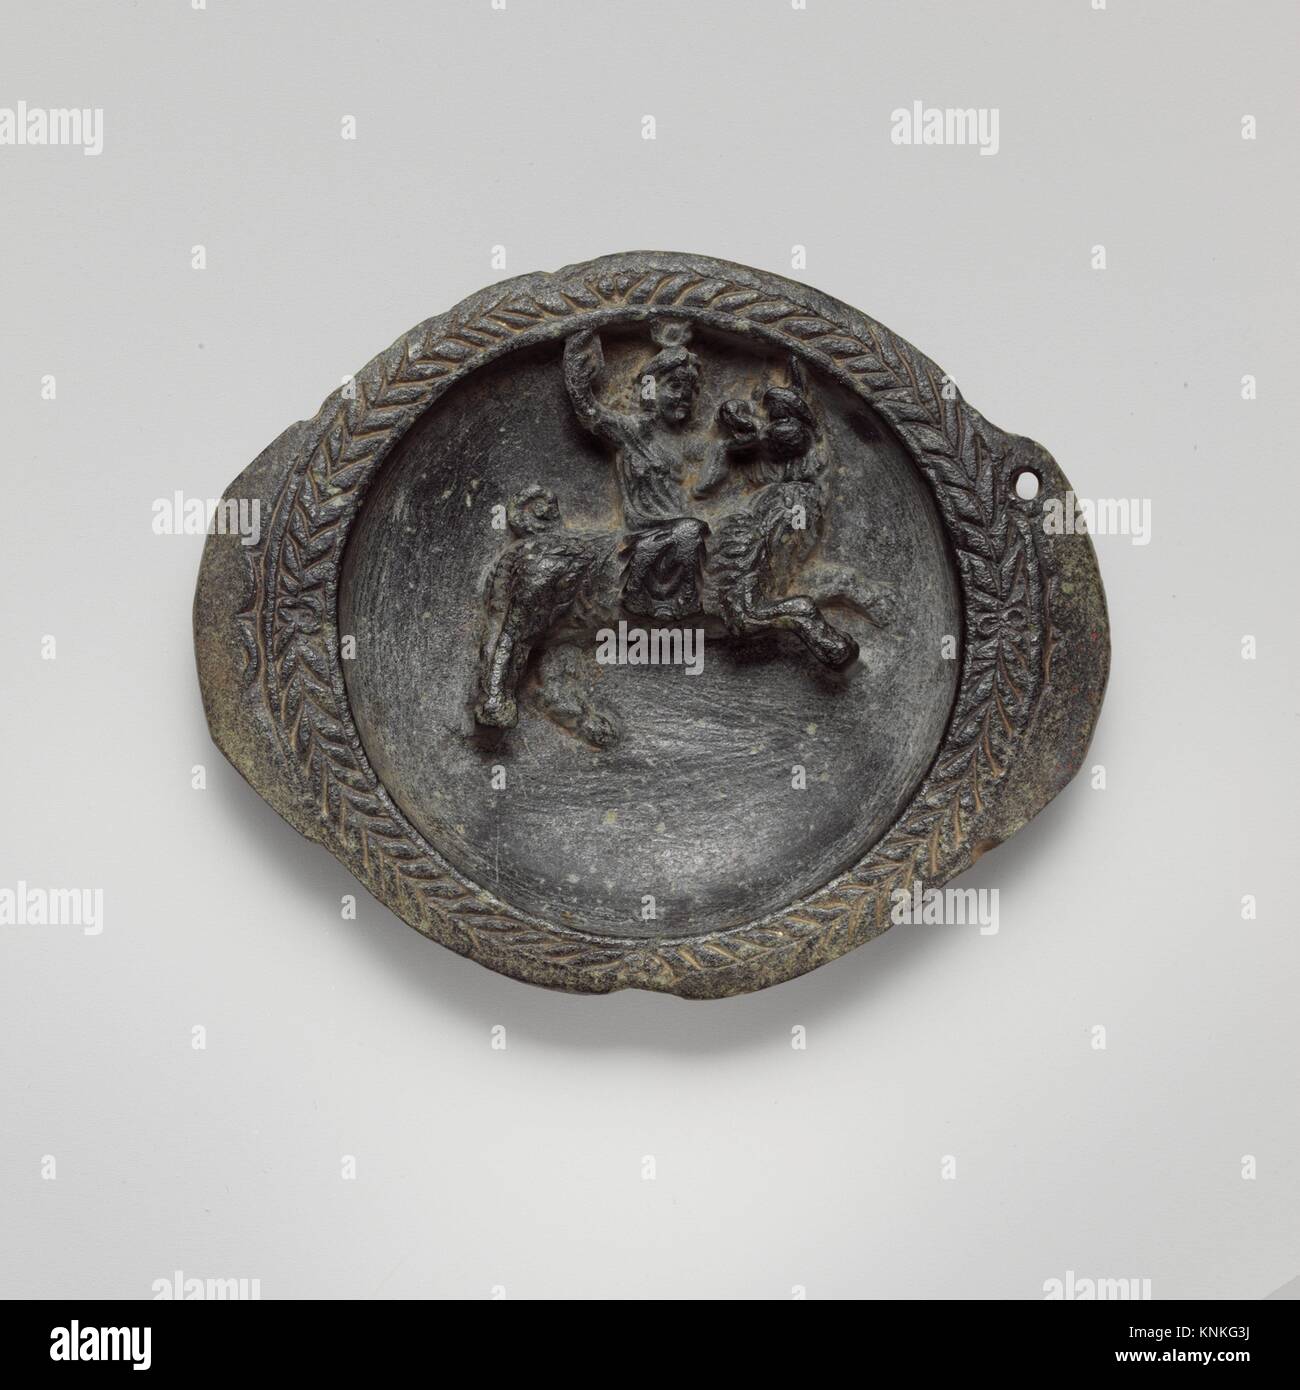 Steatite dish. Period: Late Hellenistic or Early Imperial; Date: ca. 1st century B.C.-1st century A.D; Culture: Egyptian, Ptolemaic or Roman; Medium: Stock Photo